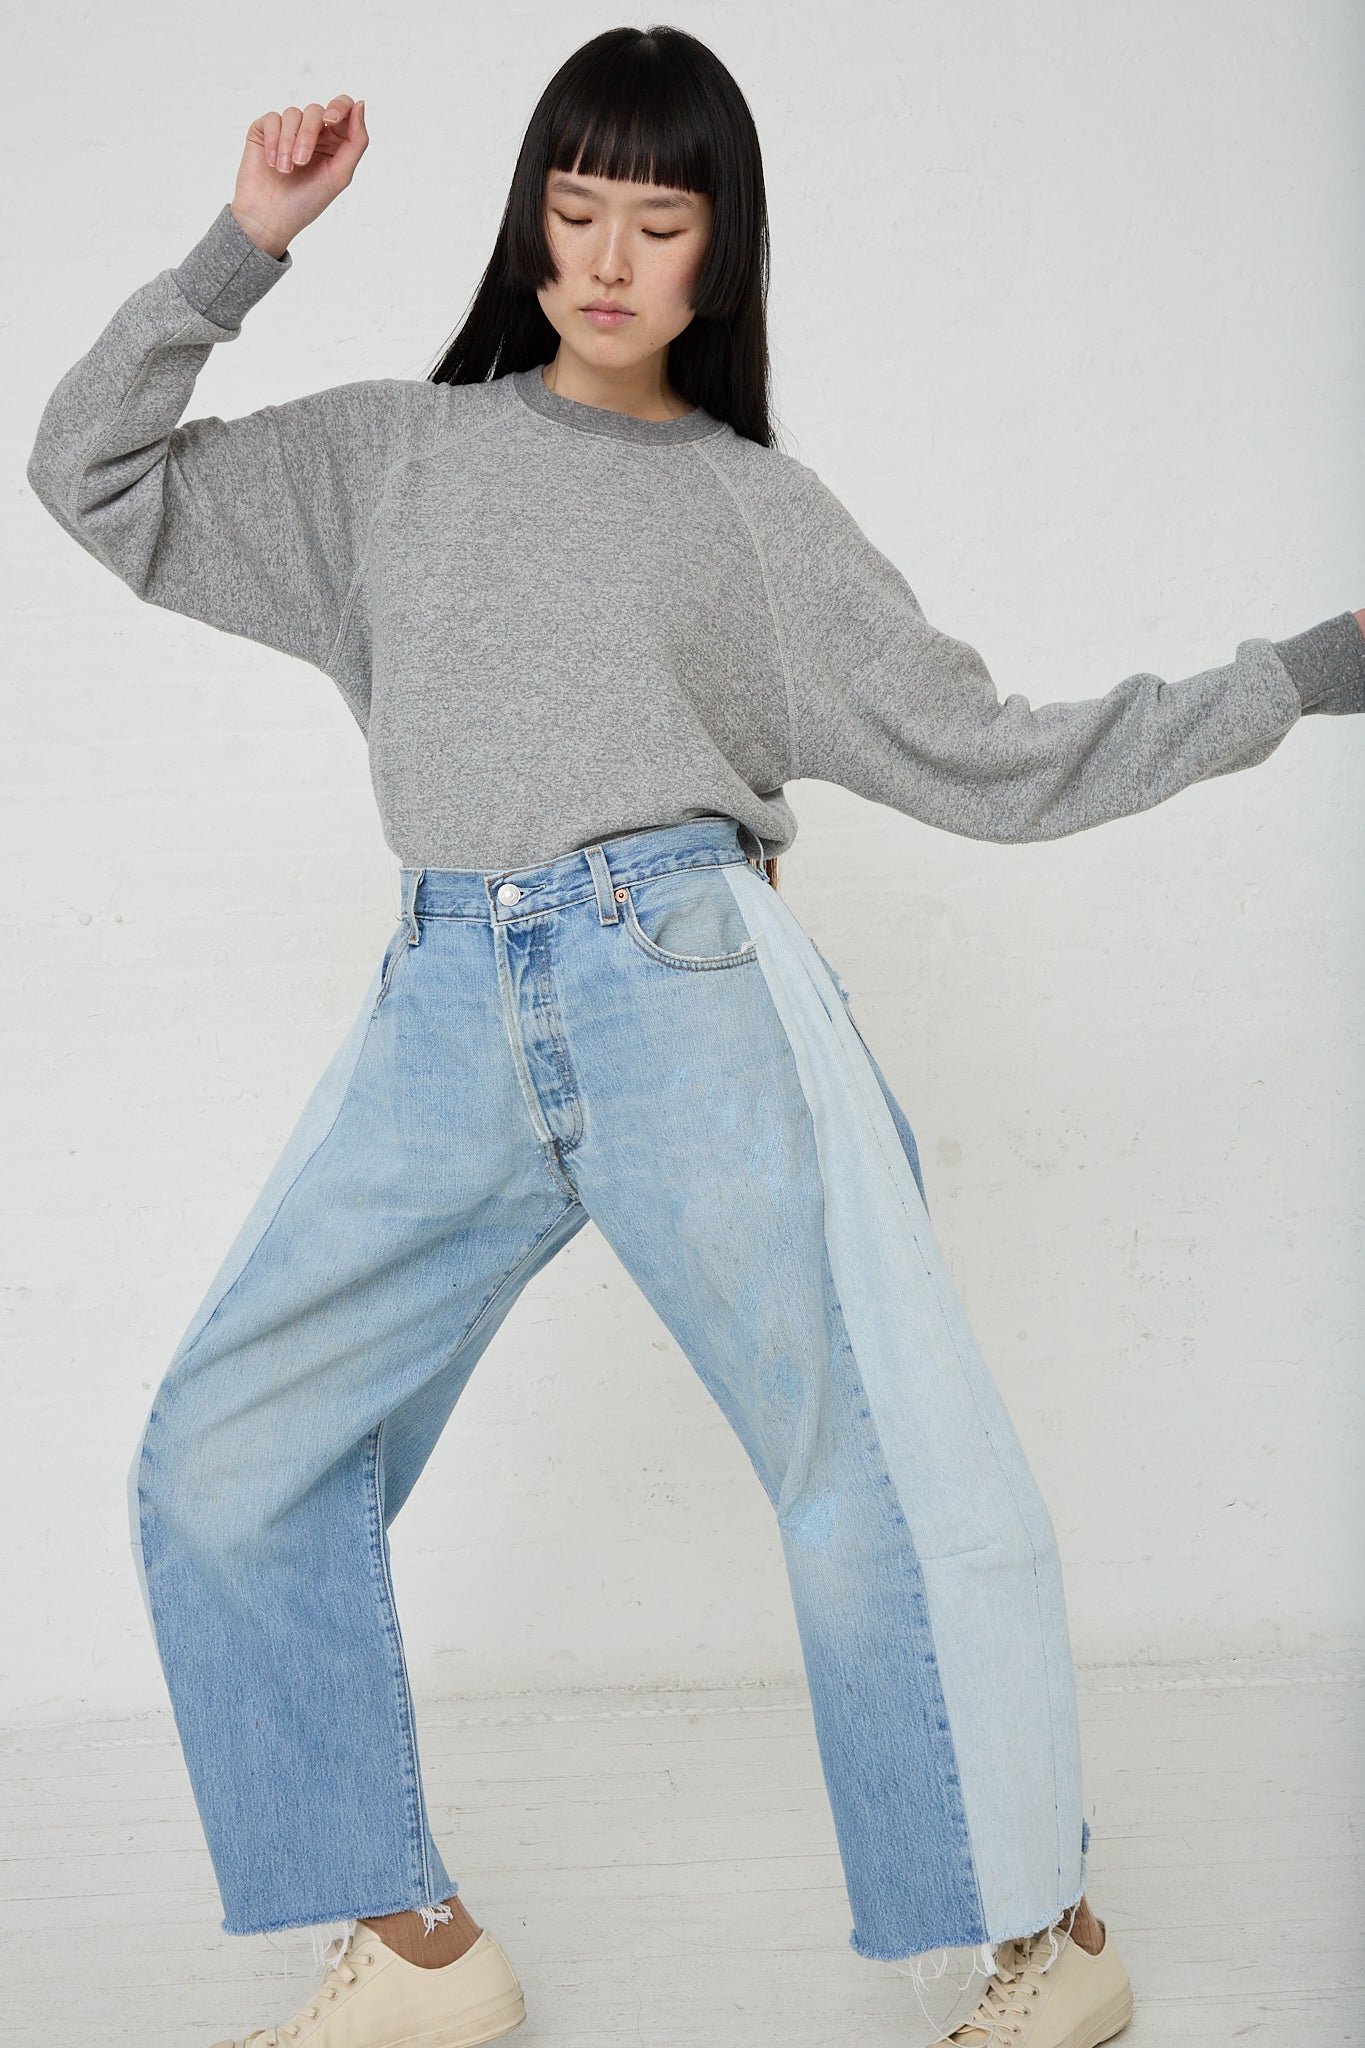 A woman wearing a grey sweater with the B Sides Lasso Jean in Vintage Indigo denim jeans. Front view and full length.